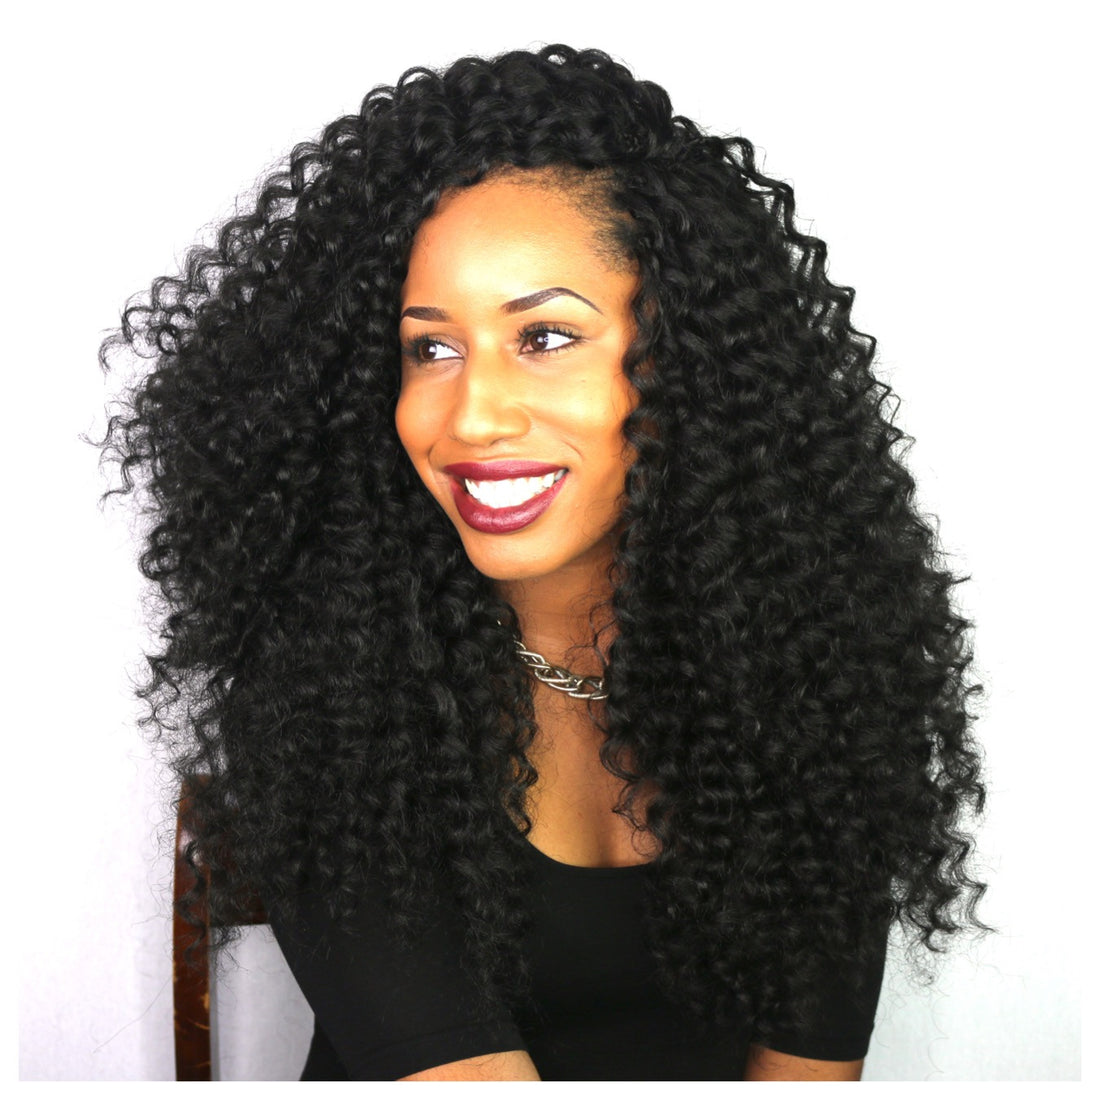 Learn how to install our Nubian curls at a long length - no tangling!